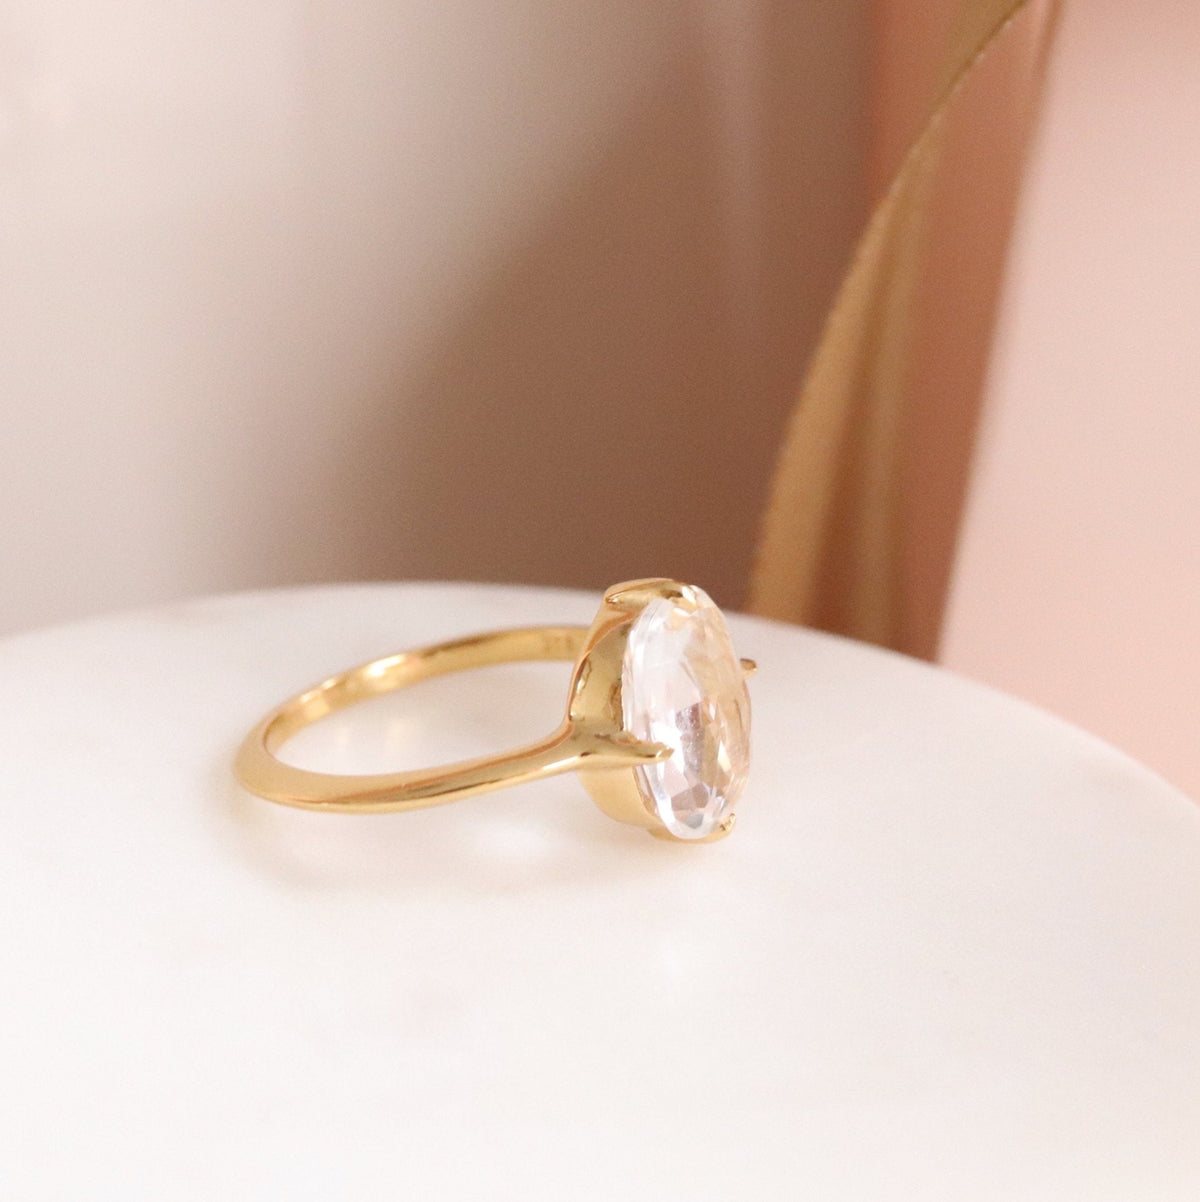 KIND OVAL SOLITAIRE RING - WHITE TOPAZ &amp; GOLD - SO PRETTY CARA COTTER